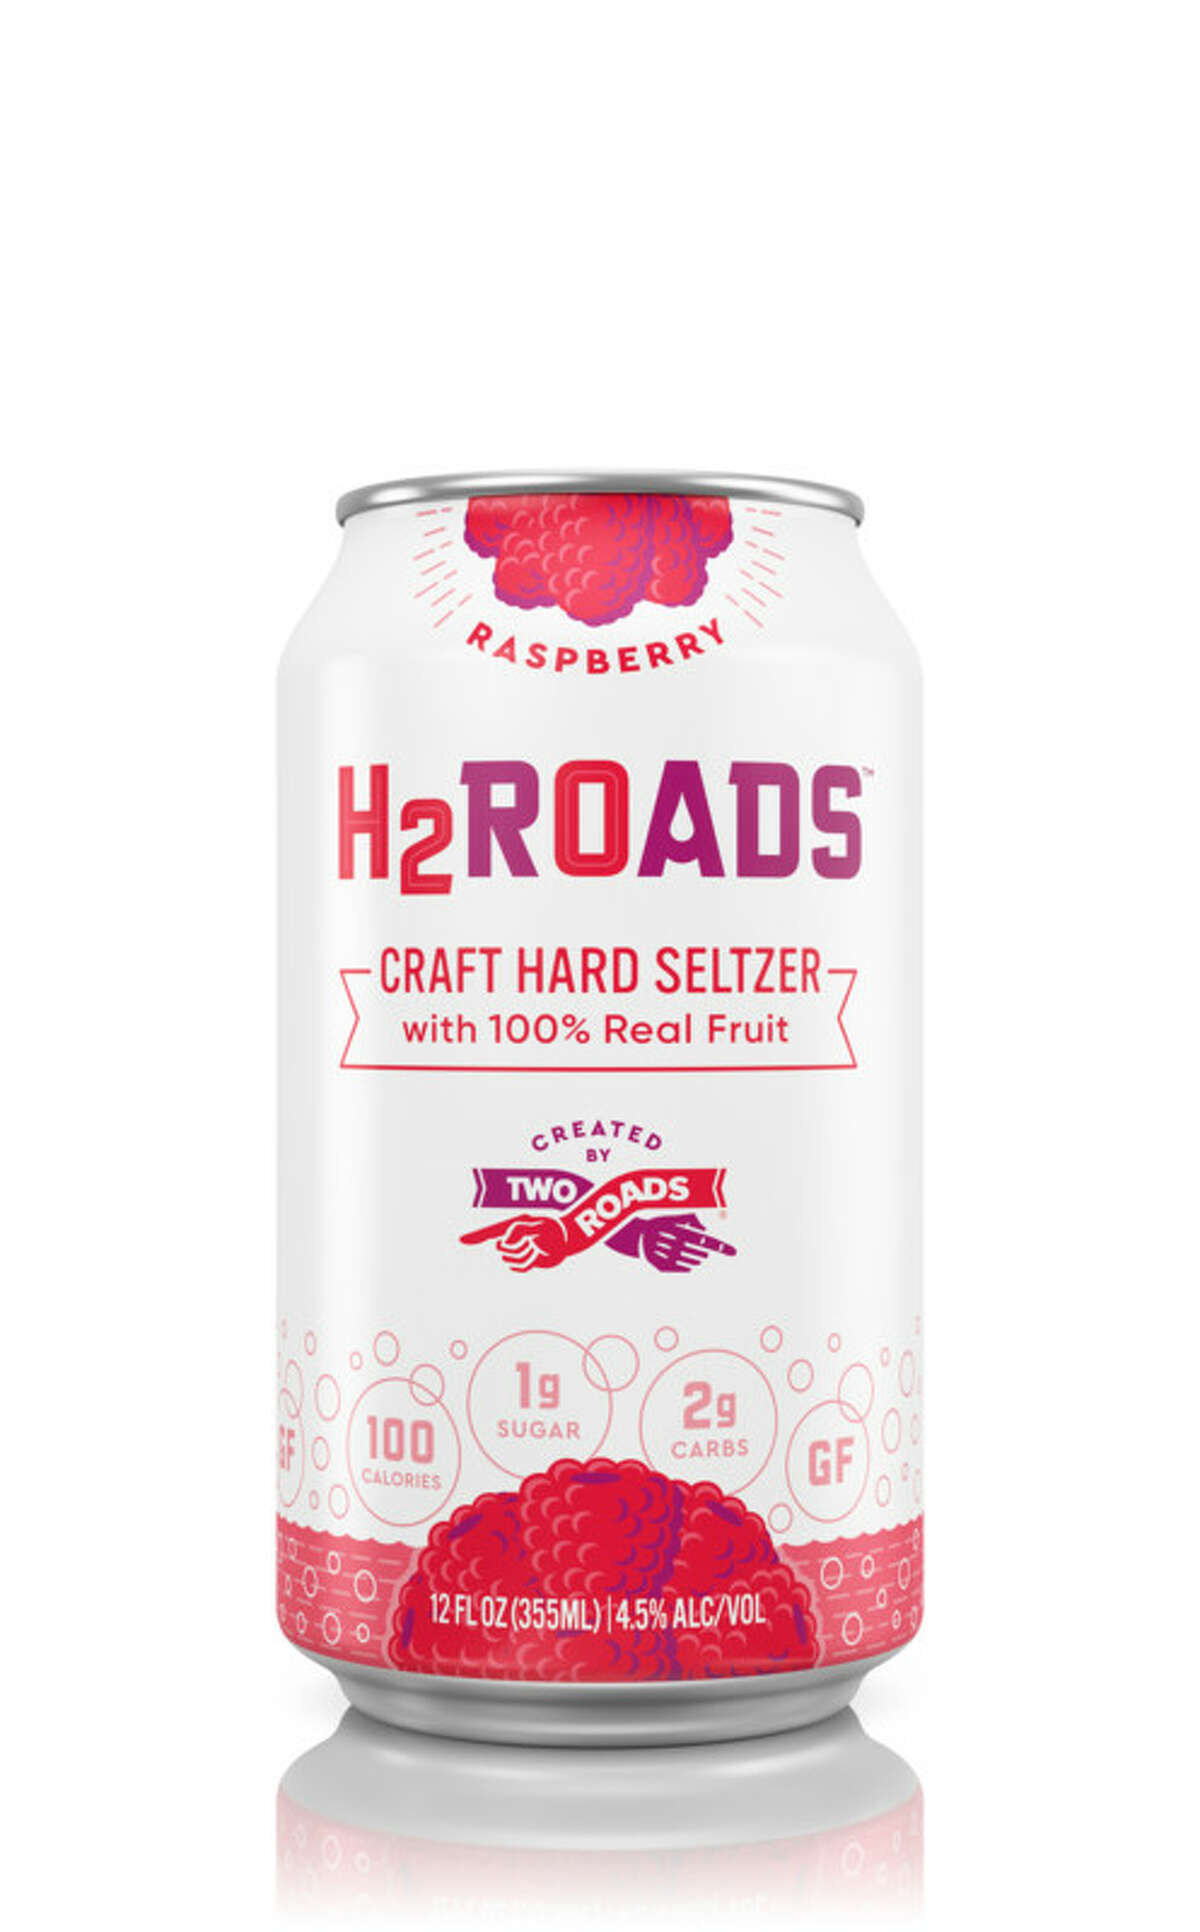 H2Roads is a line of “craft hard seltzer” from Two Roads Brewing Co. in Startford, Conn.